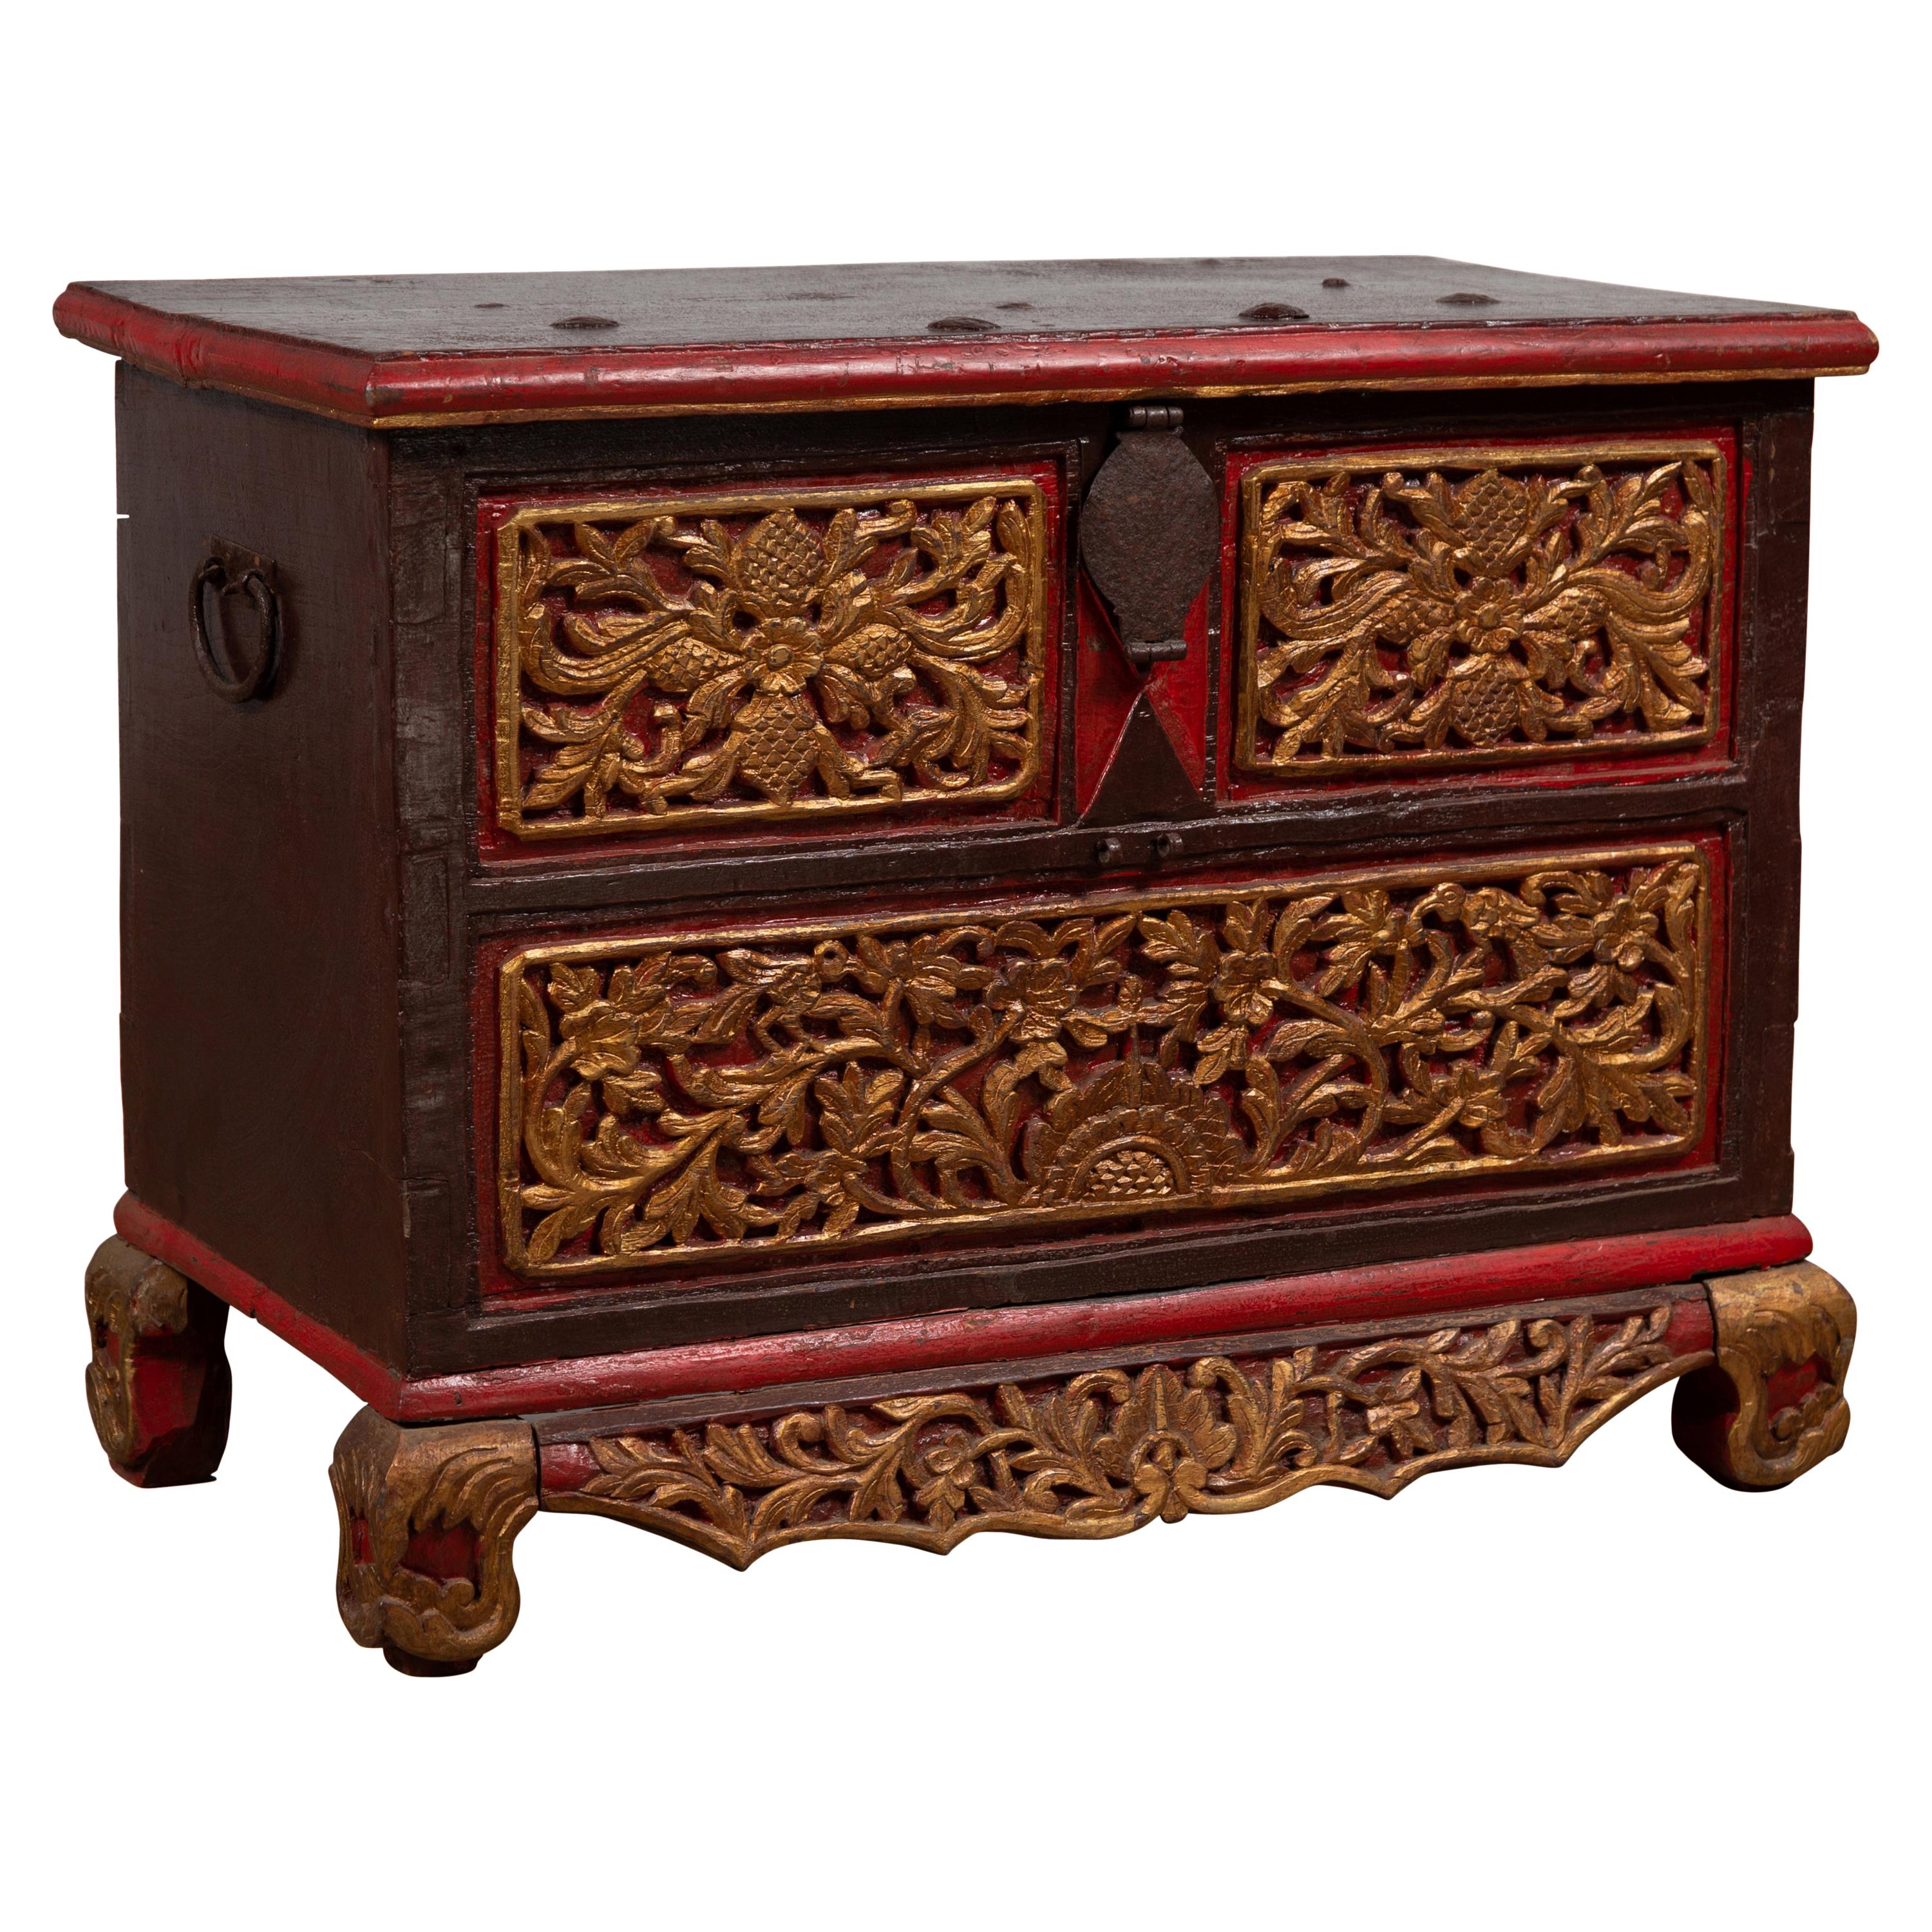 Antique Madura Hand Carved Wooden Blanket Chest with Red, Brown and Gilt Accents